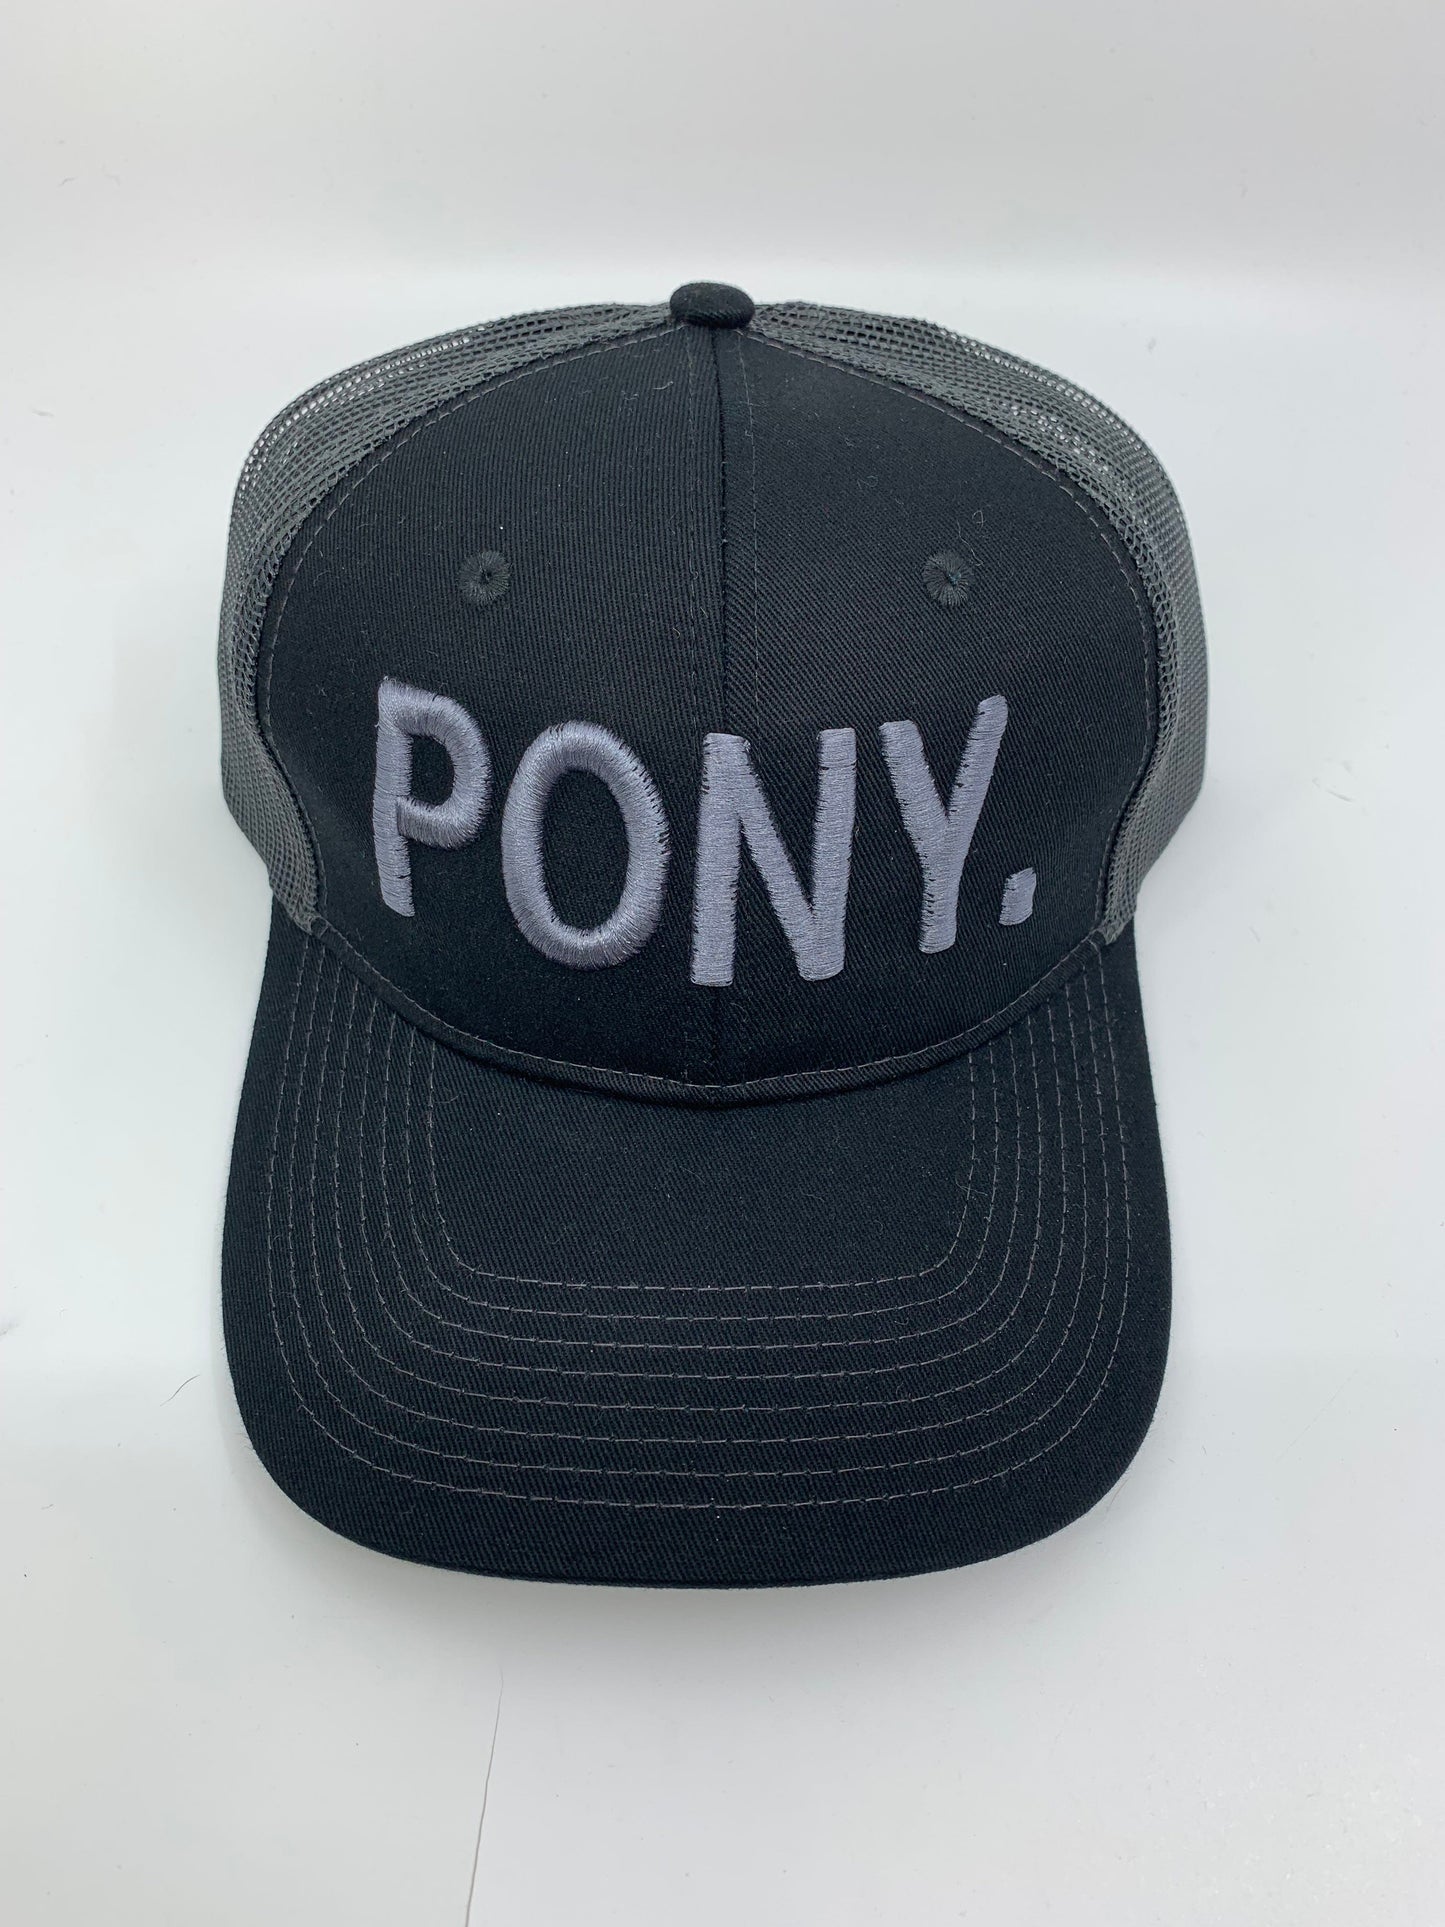 Equestrian Team Apparel Custom Team Hats Trucker Cap-Pony equestrian team apparel online tack store mobile tack store custom farm apparel custom show stable clothing equestrian lifestyle horse show clothing riding clothes horses equestrian tack store